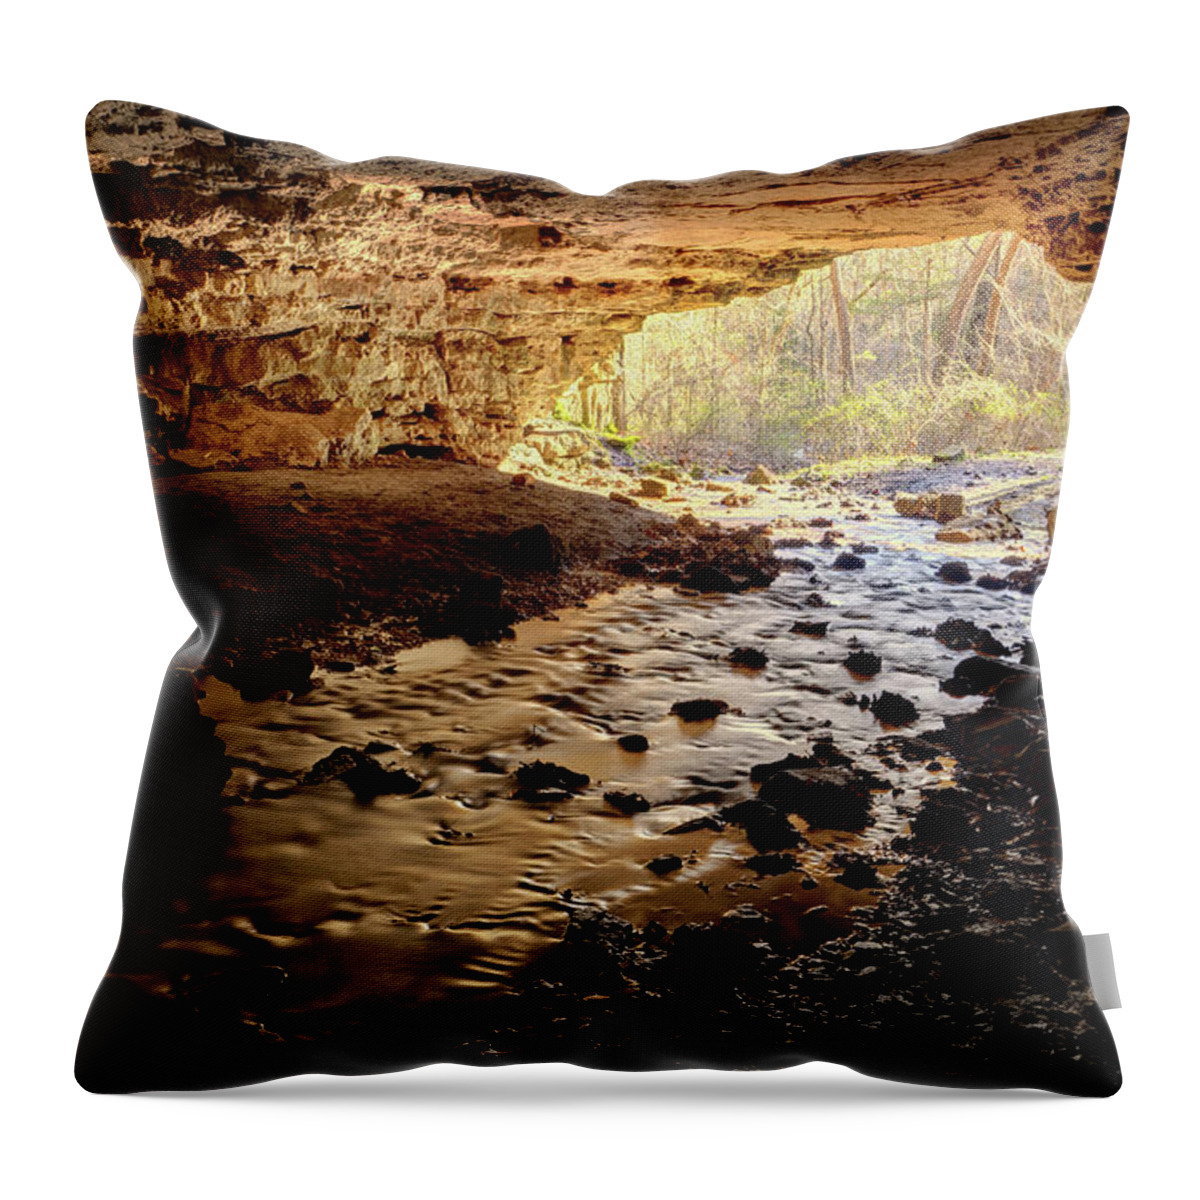 Natural Tunnel Throw Pillow featuring the photograph Kaintain Hollow Natural Tunnel by Robert Charity